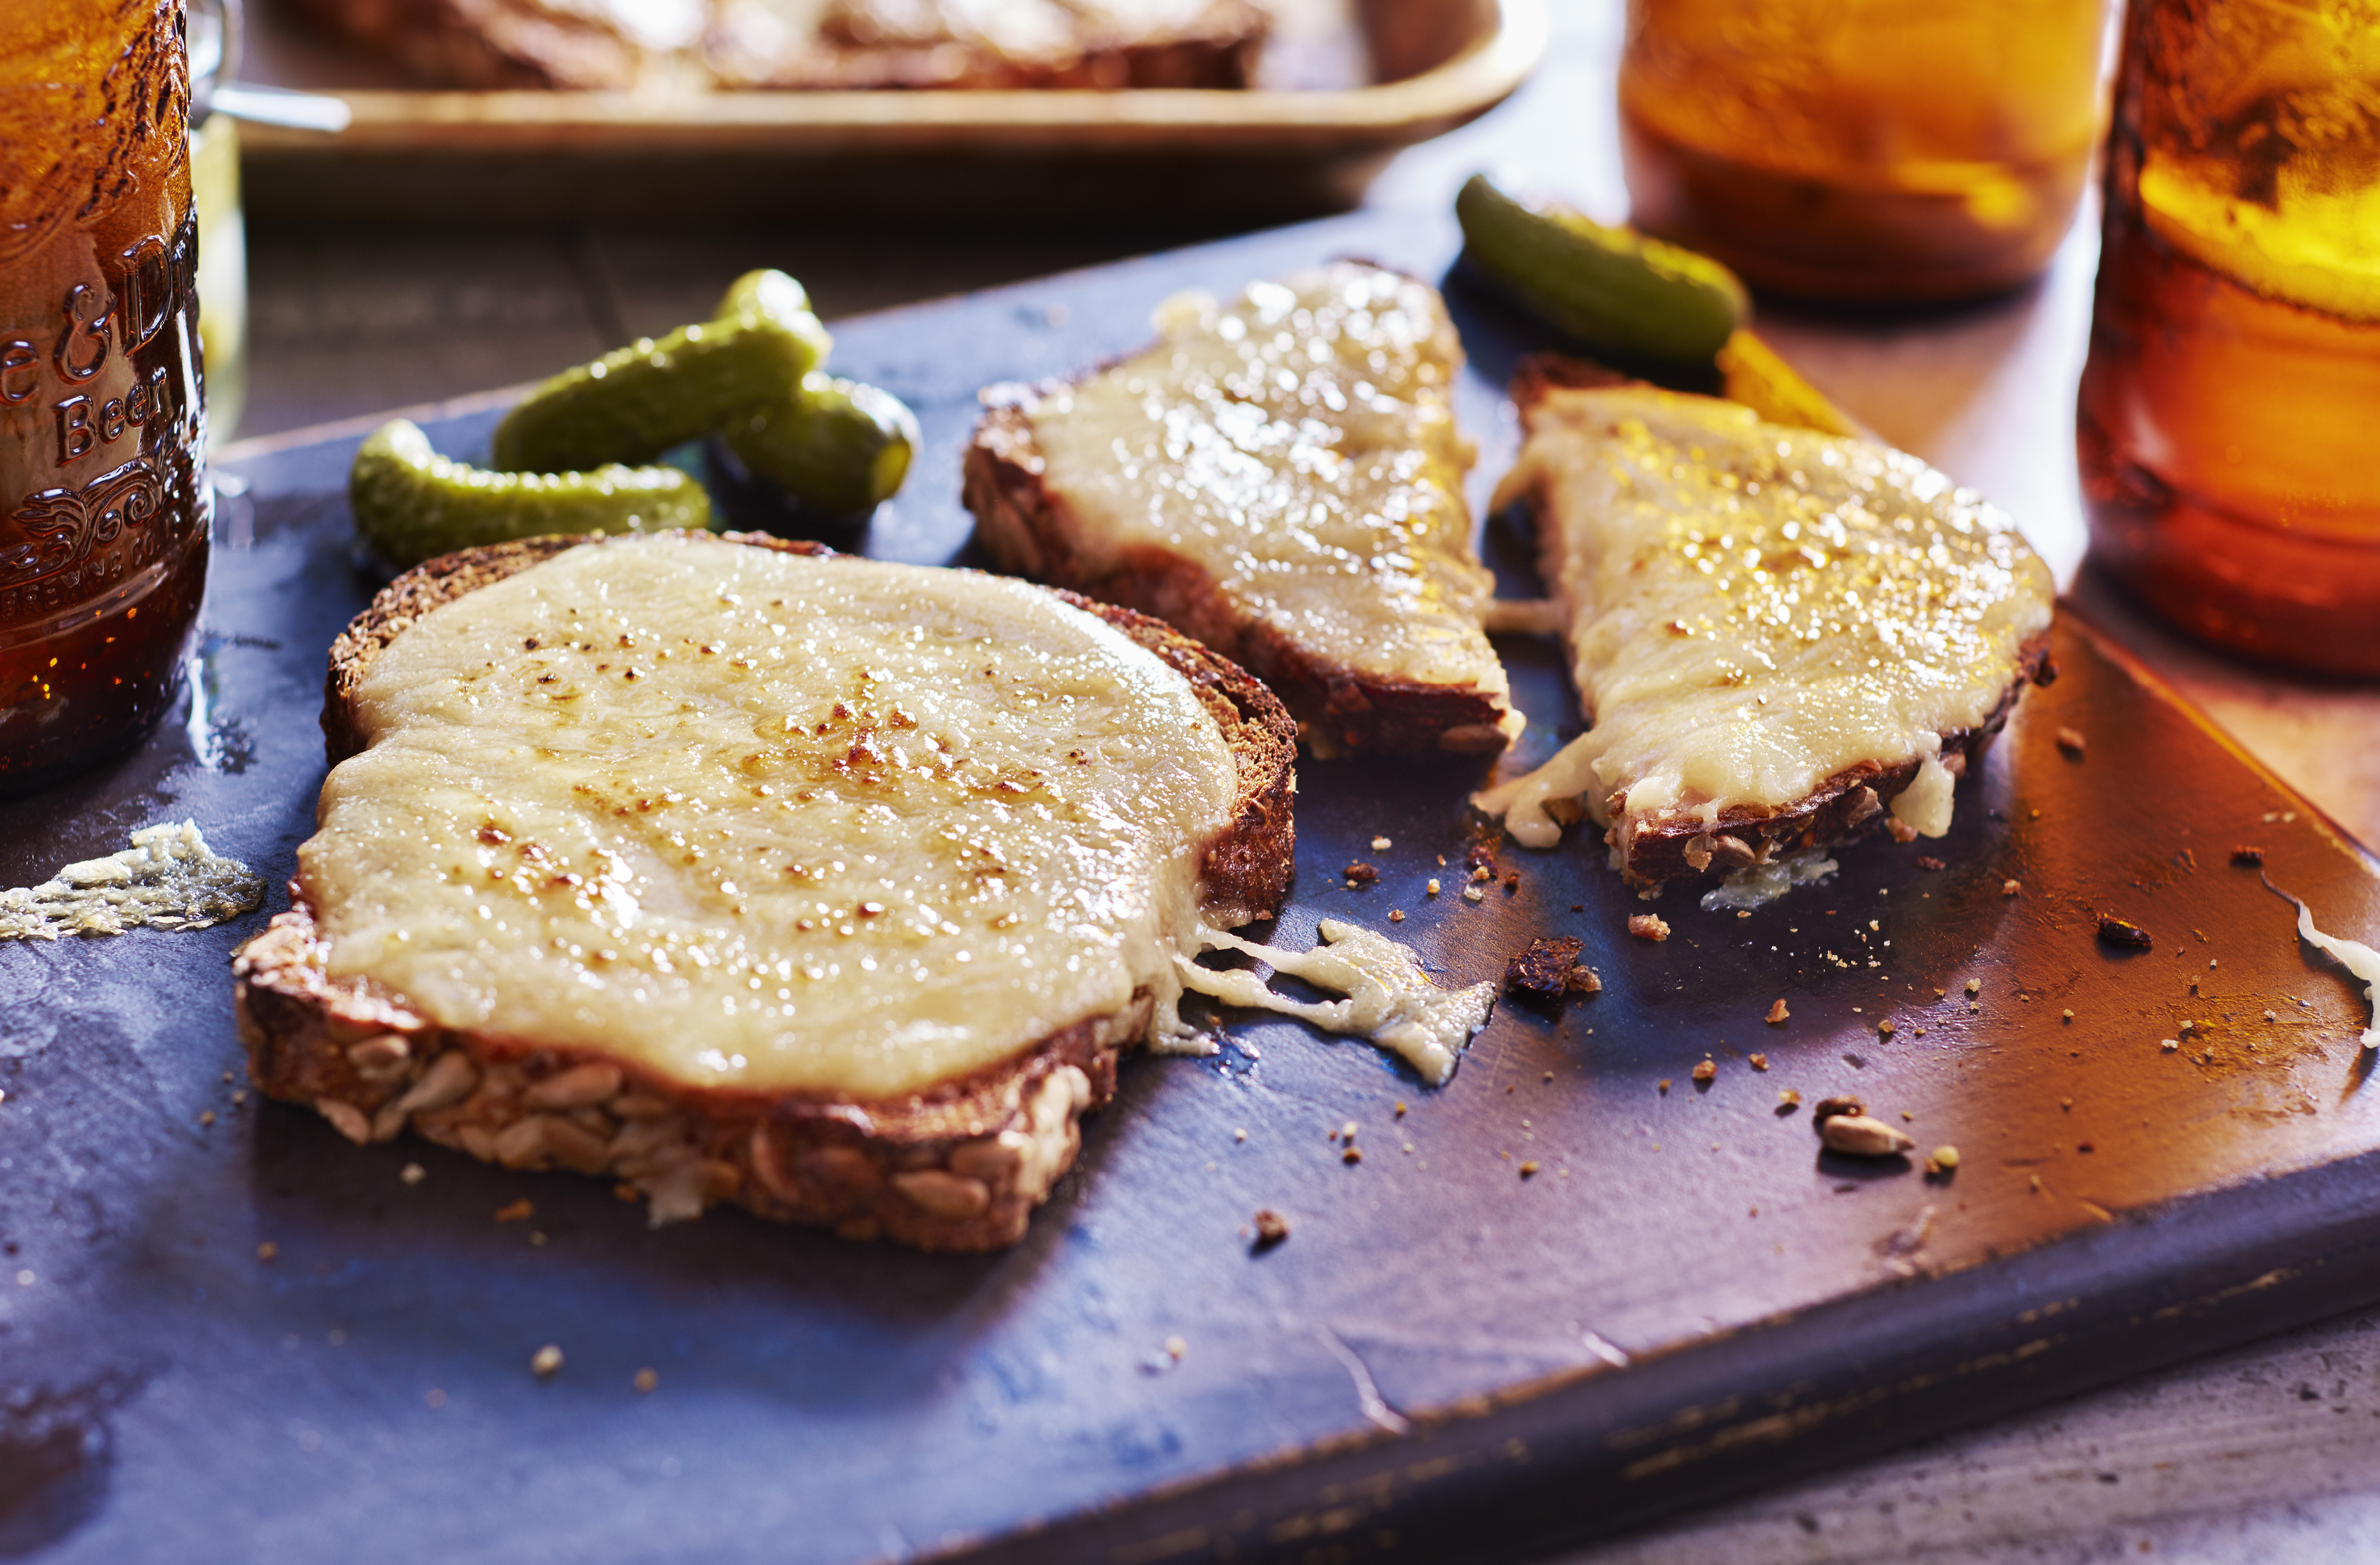 Slices of Welsh rarebit, comprised of toast covered in spiced cheese sauce
